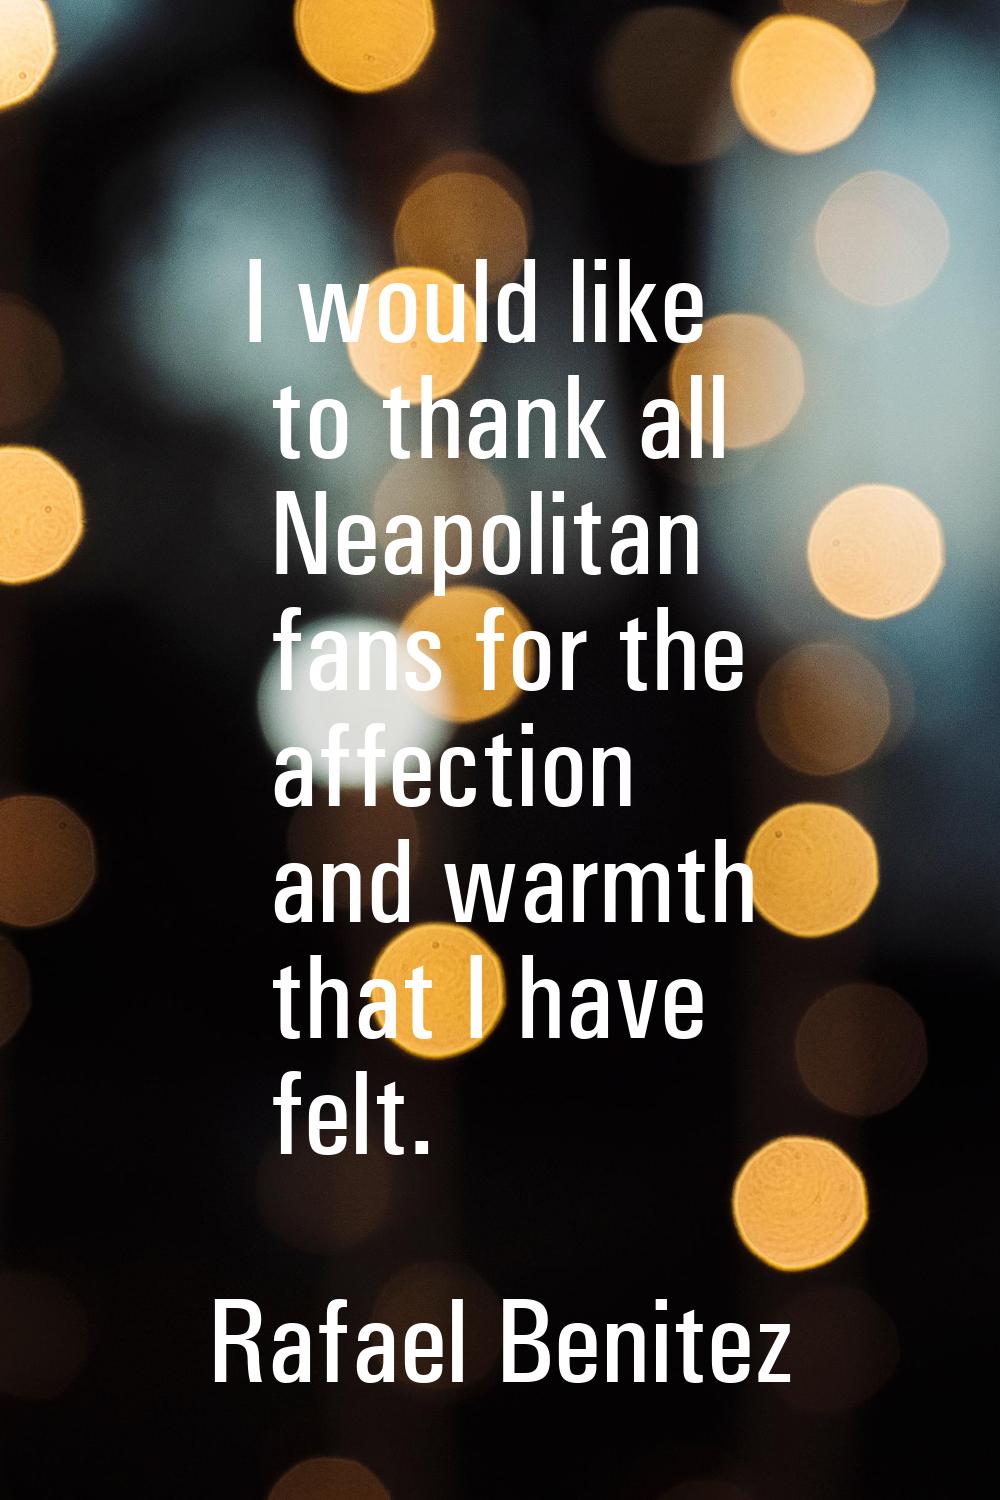 I would like to thank all Neapolitan fans for the affection and warmth that I have felt.